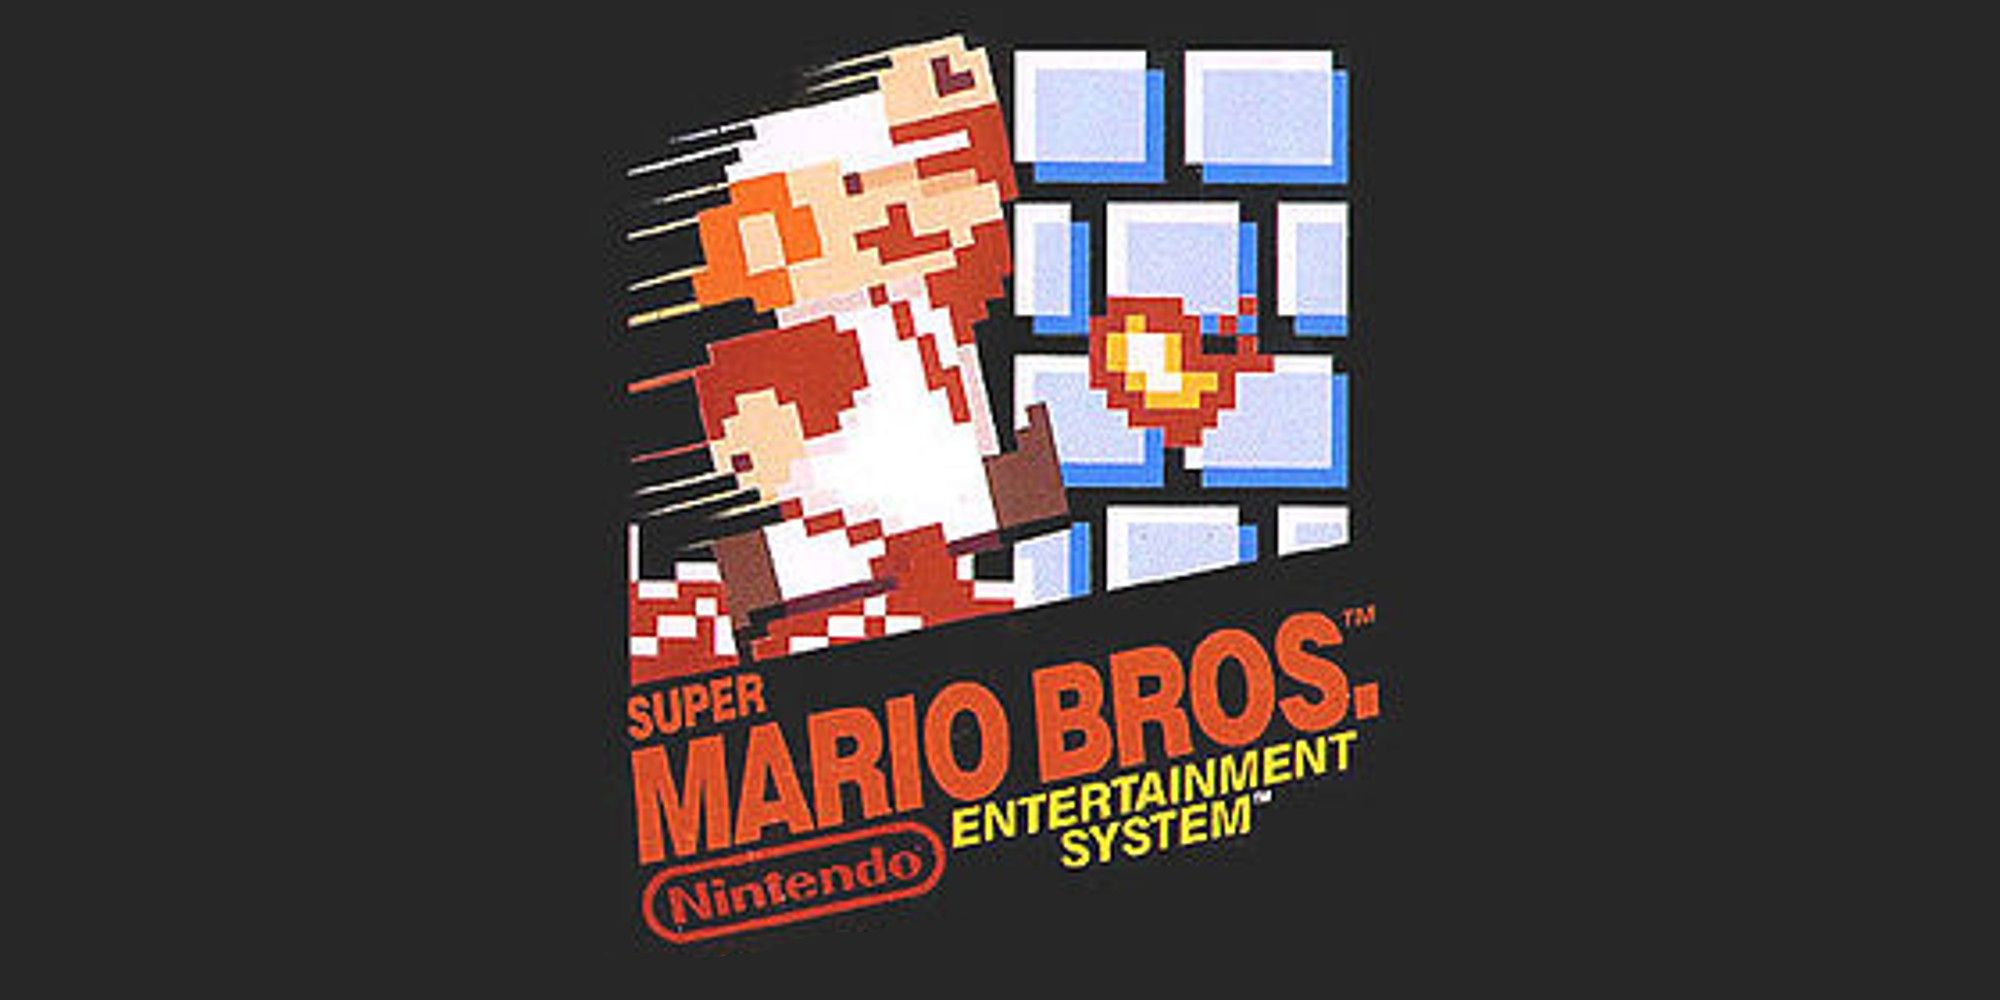 Super Mario Bros Cover Art, Mario jumping with fire flower power